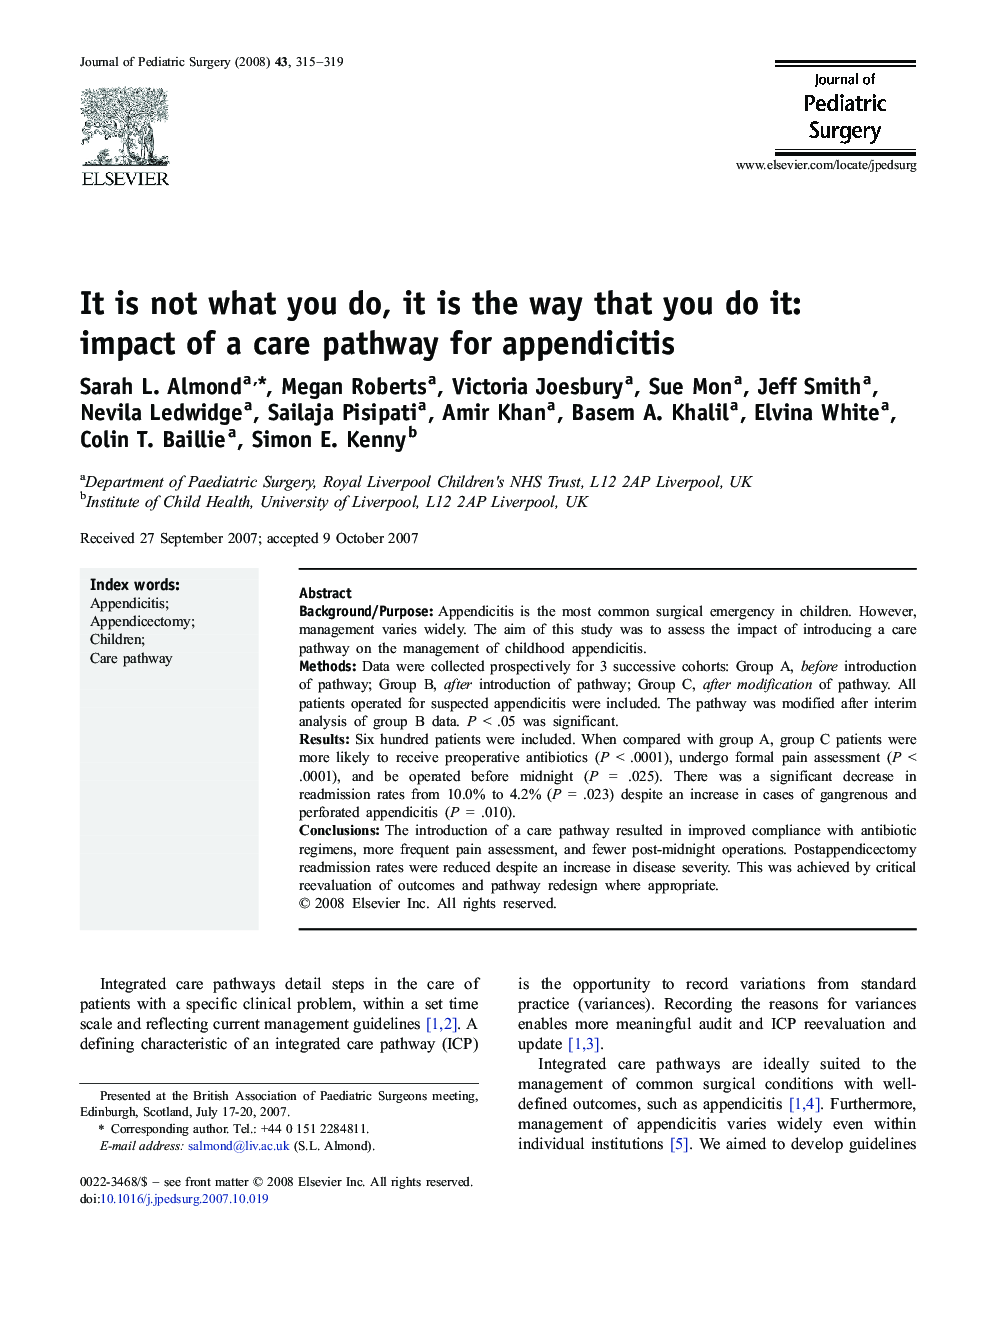 It is not what you do, it is the way that you do it: impact of a care pathway for appendicitis 